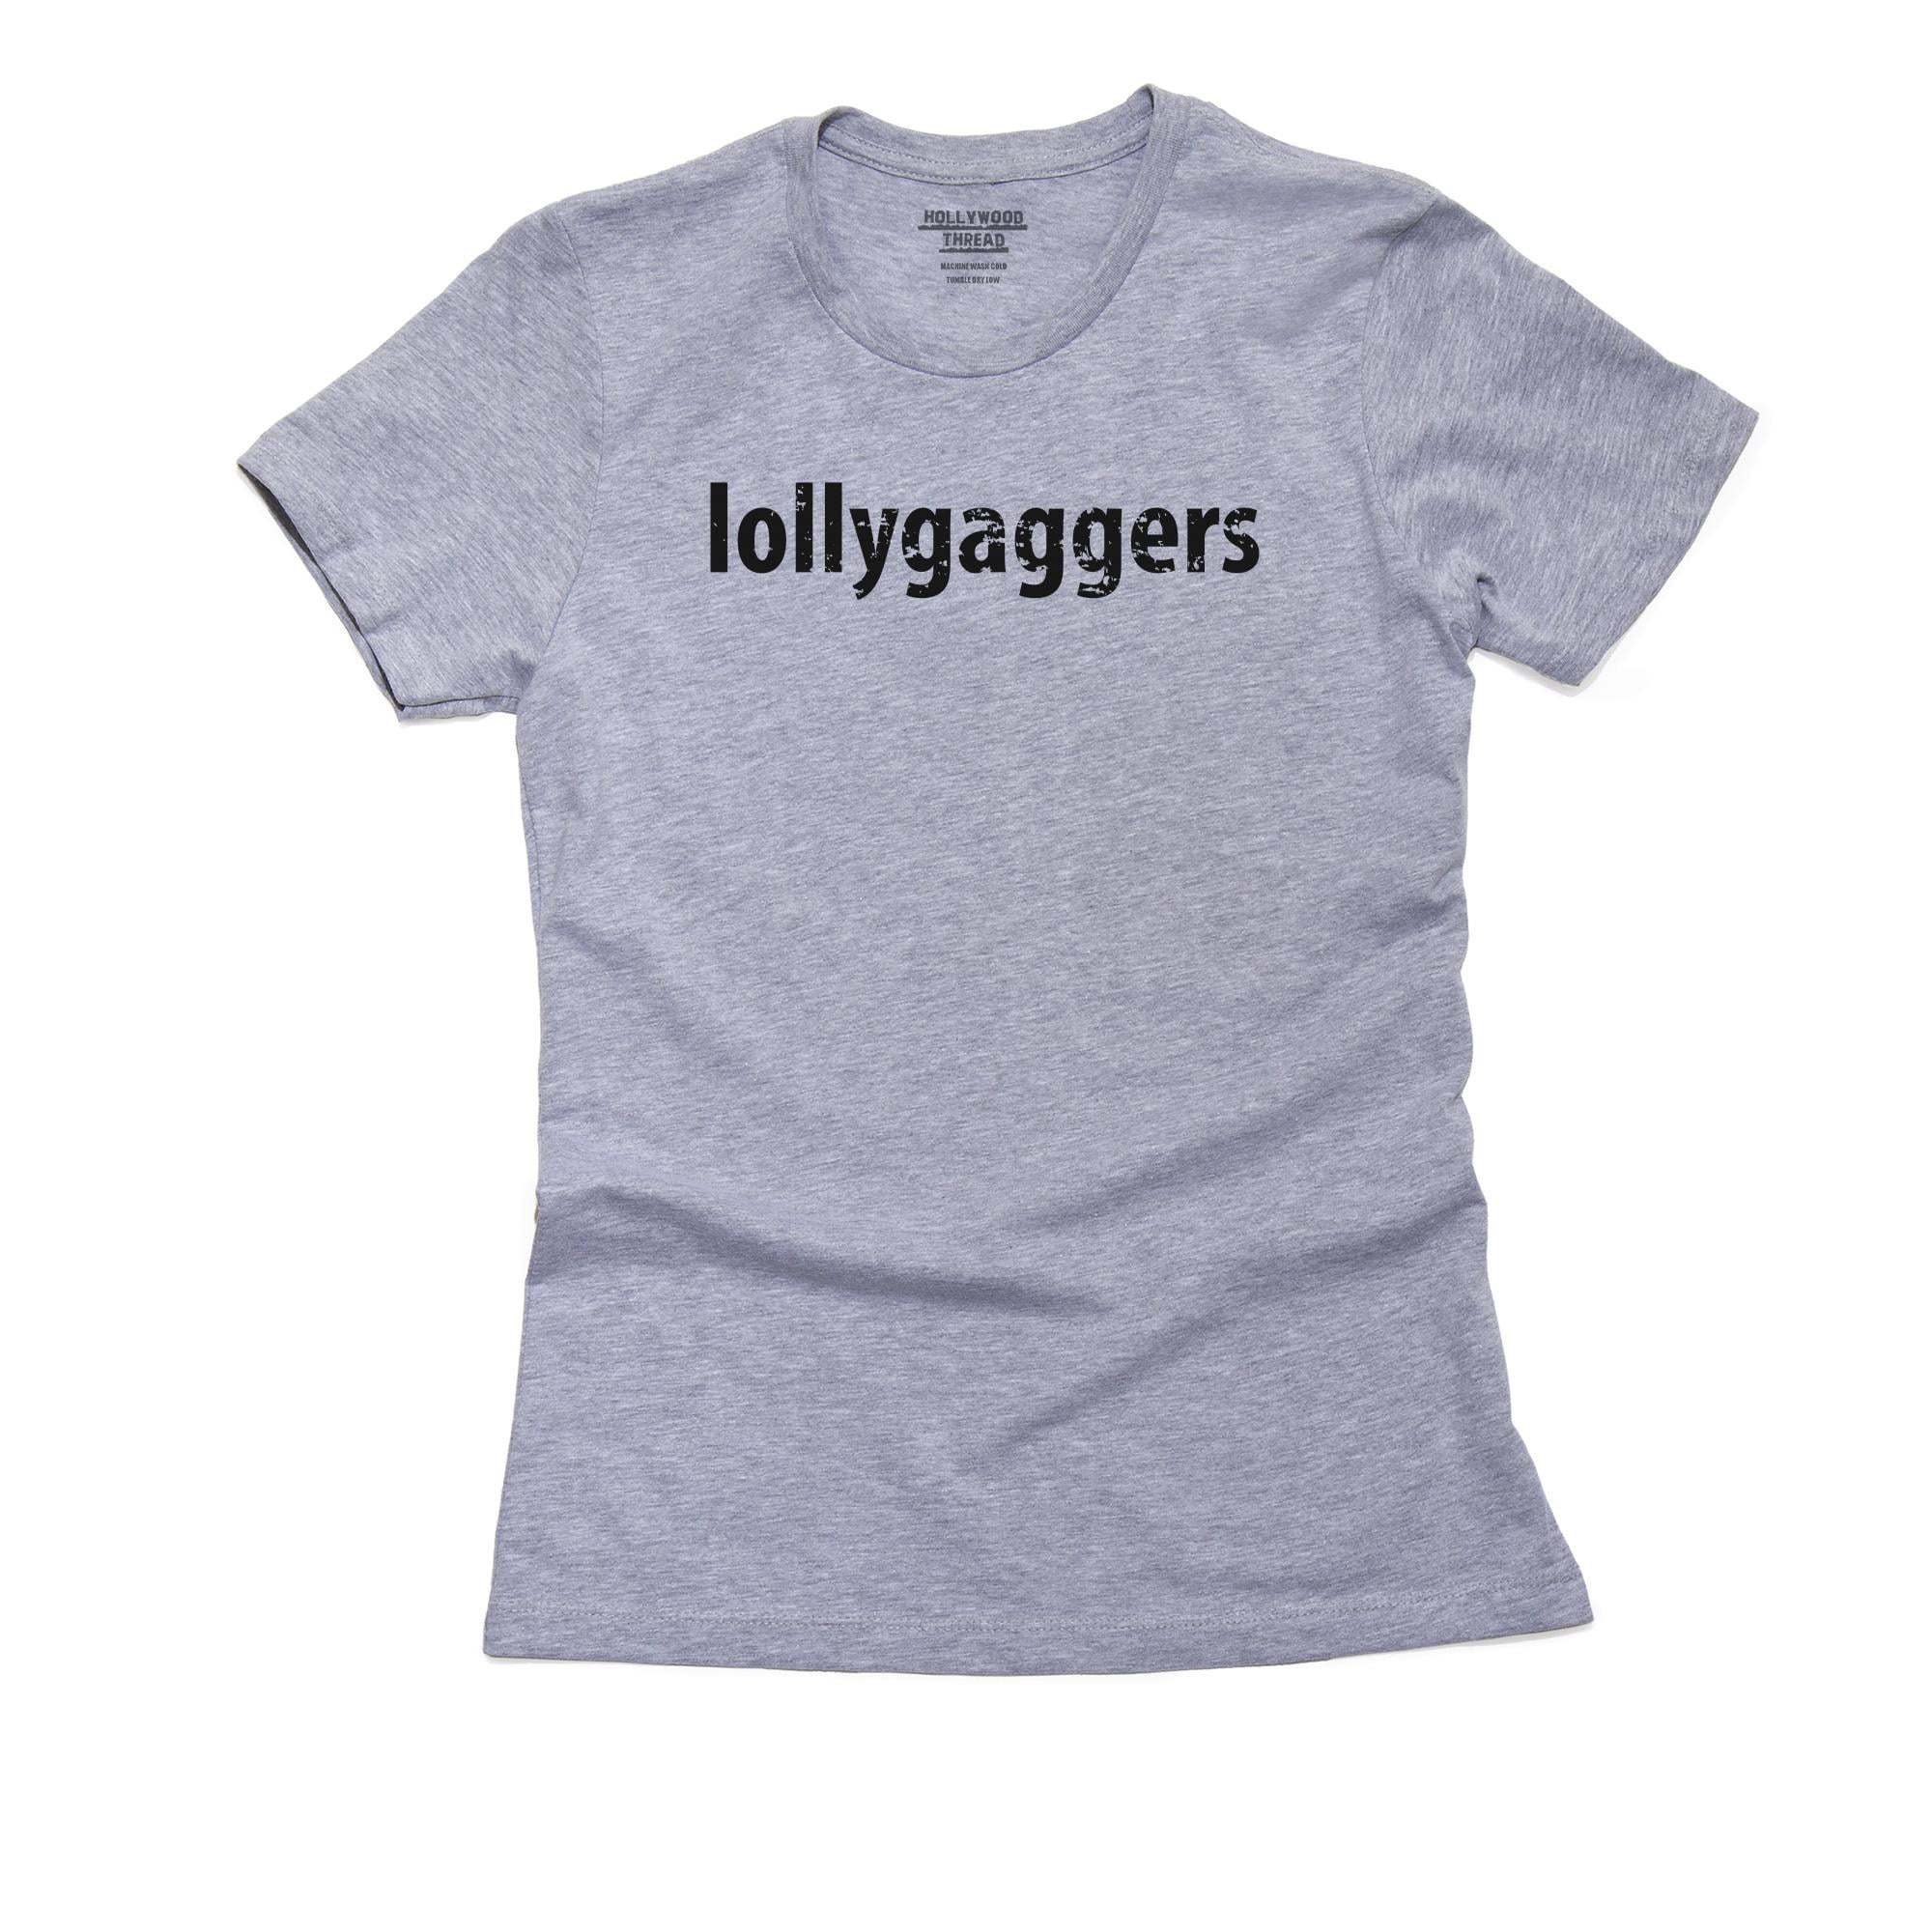 Lollygaggers - Iconic Bull Durham Expression Women's Cotton Grey T